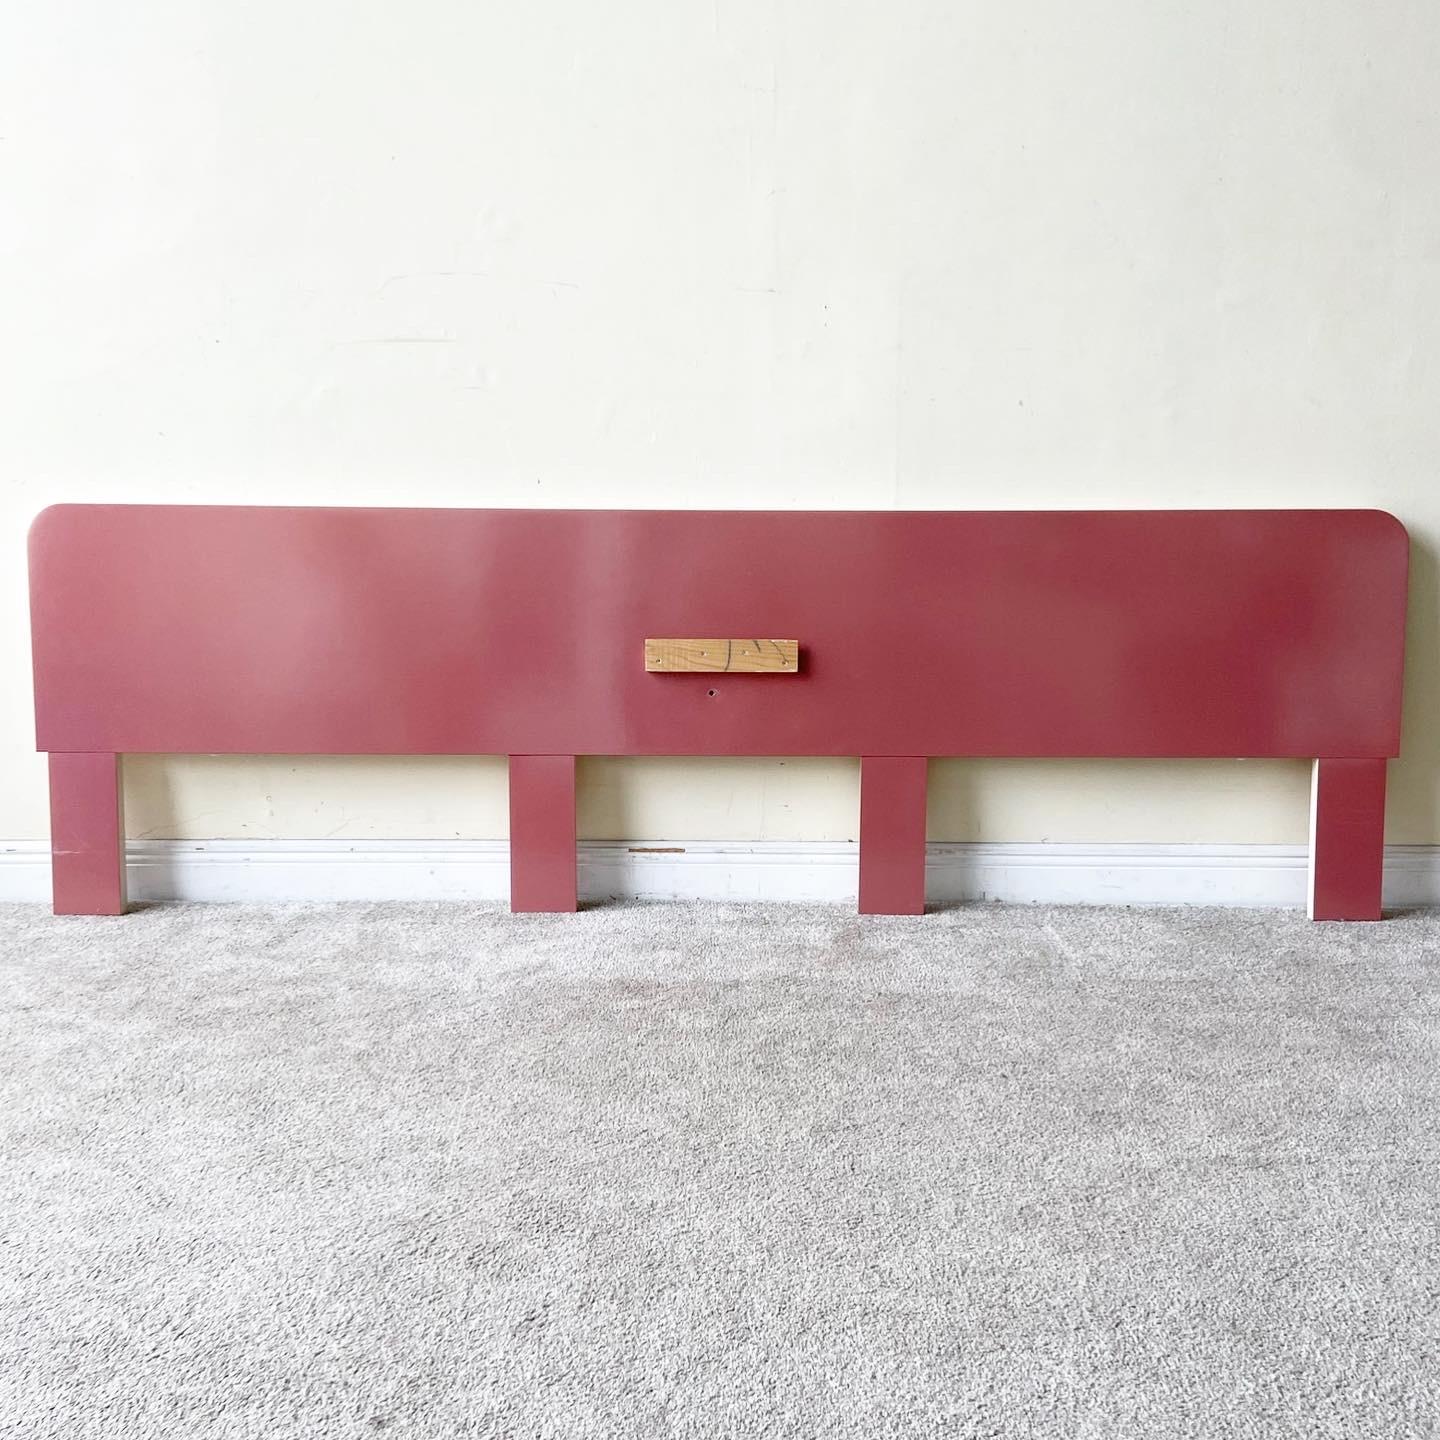 Incredible postmodern oversized headboard. Features a dark pink lacquer laminate and cream strip over the edges. A floating drawer was installed in the center and can be reinstalled in the same place or anywhere else on the face of the headboard.